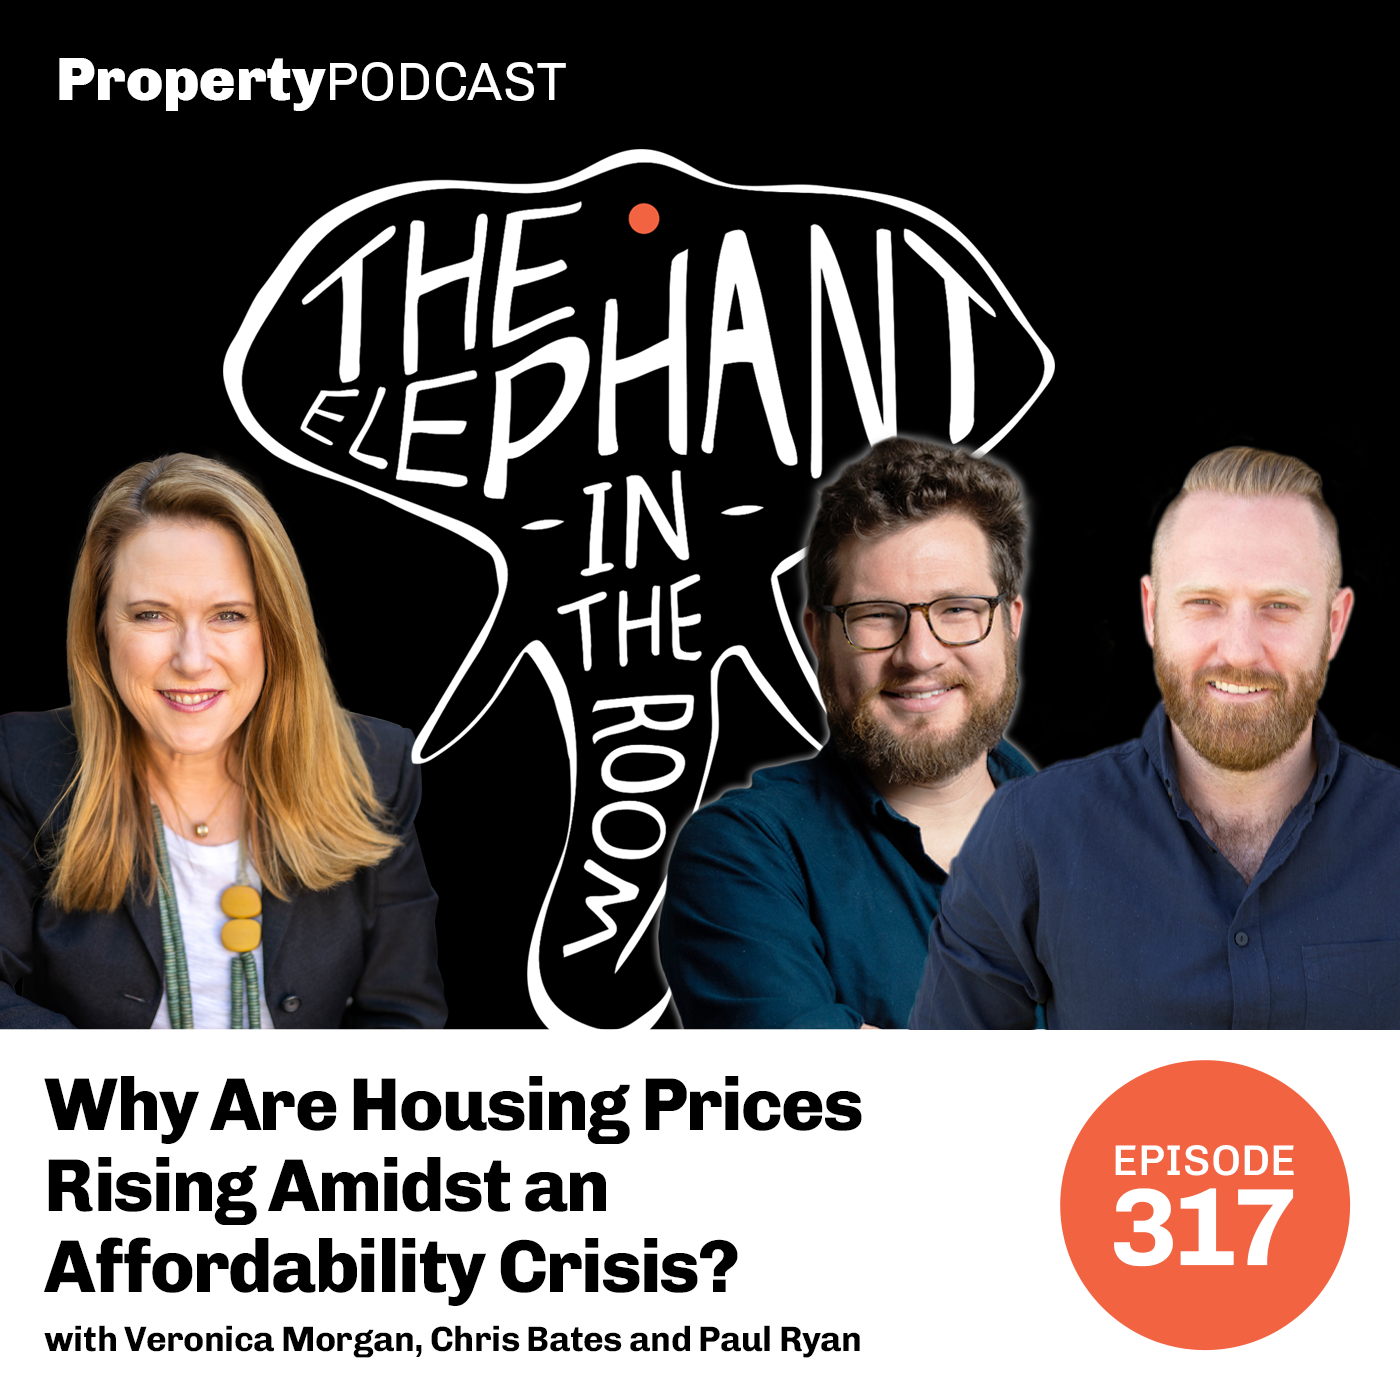 Why Are Housing Prices Rising Amidst an Affordability Crisis?